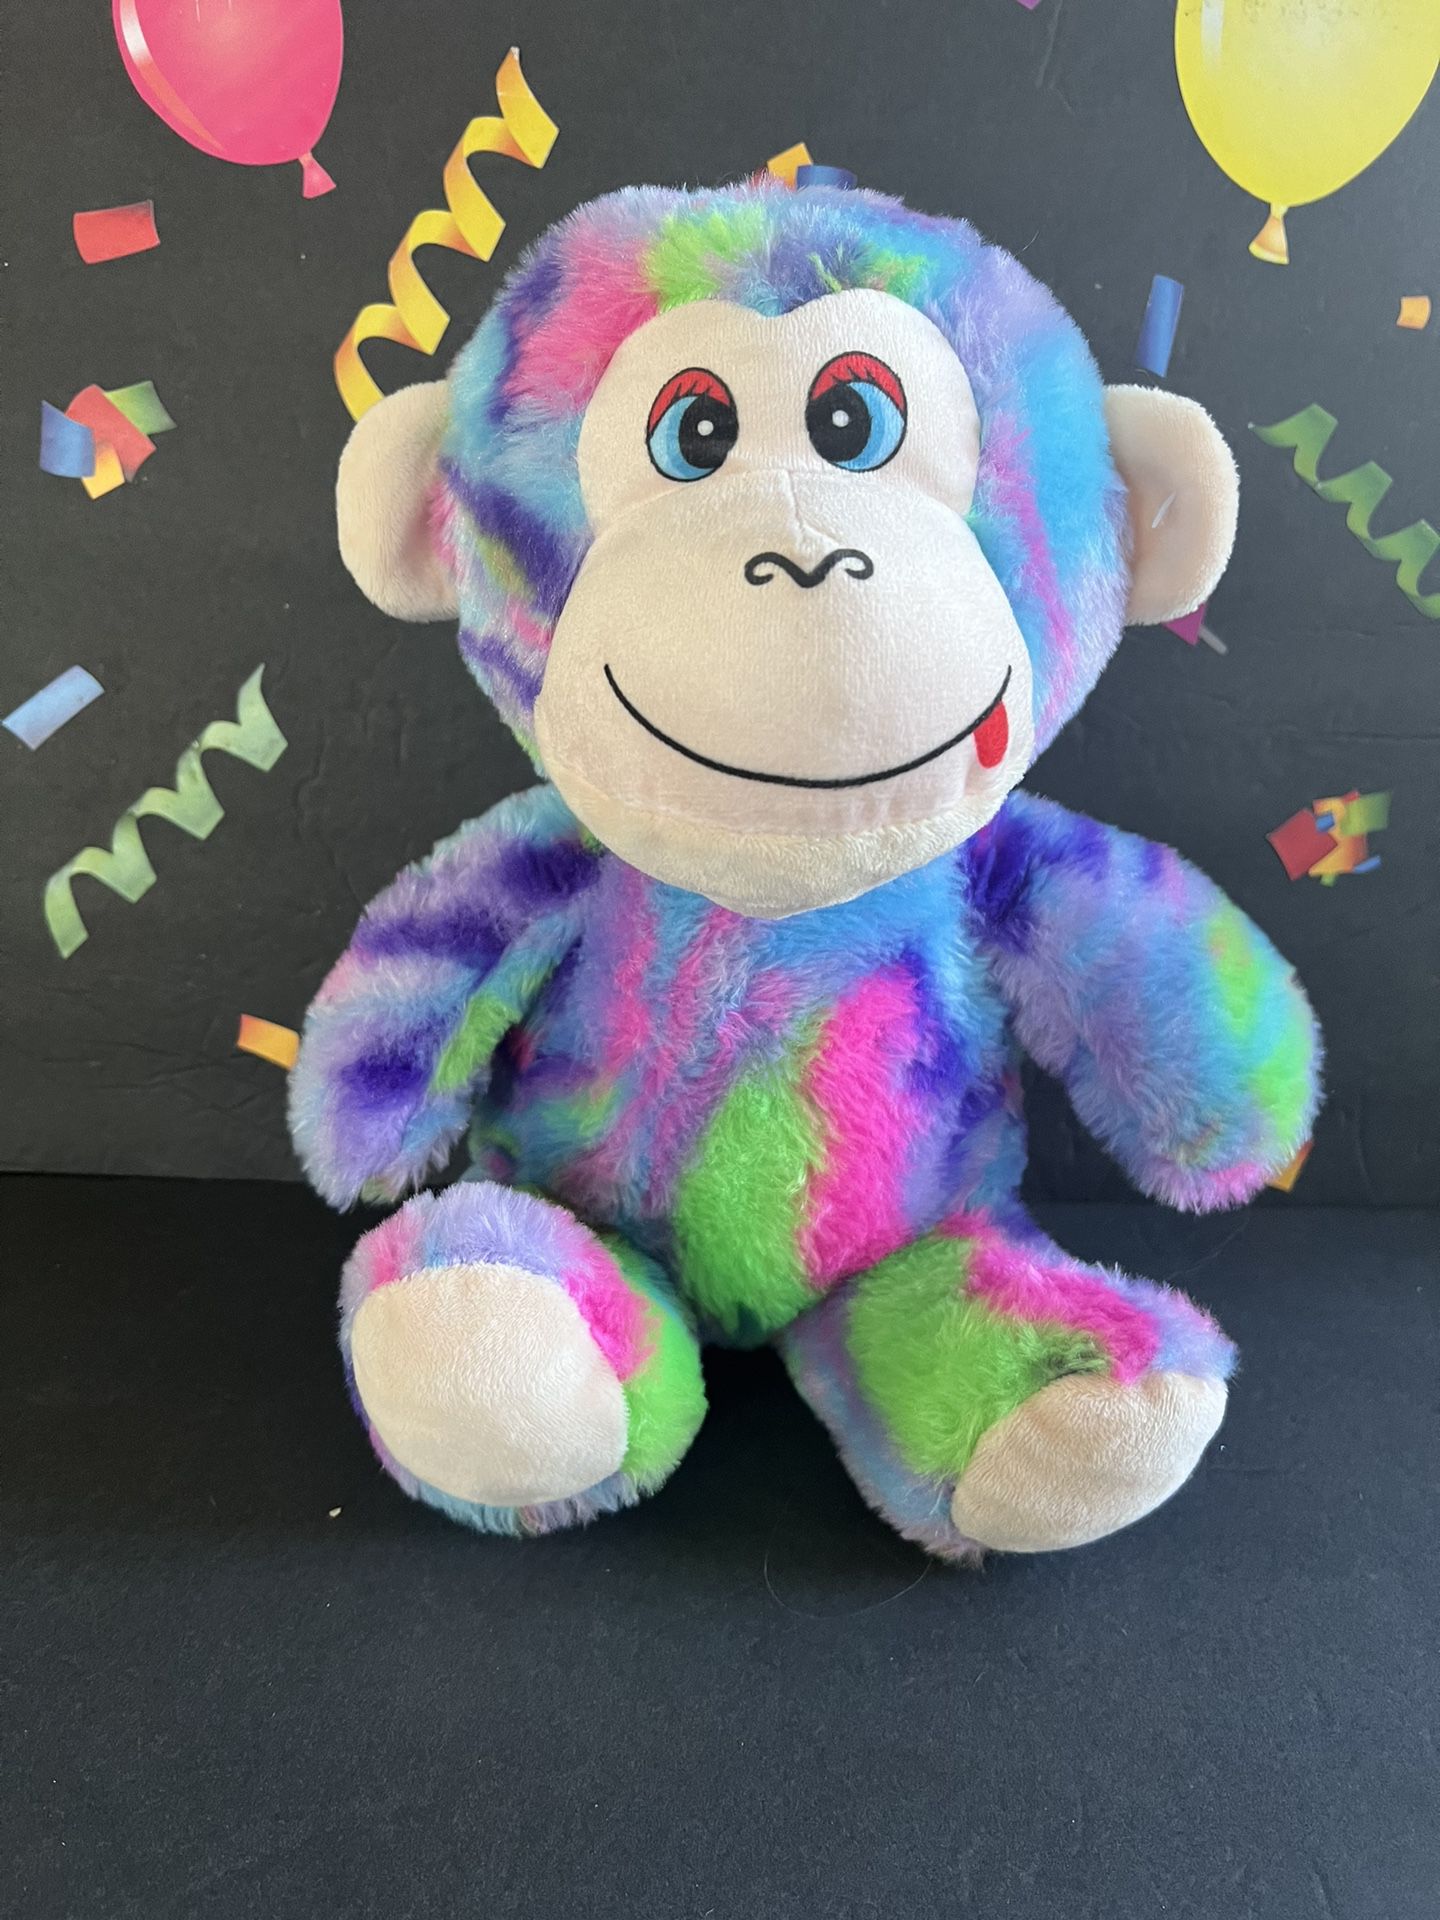 RAINBOW COLORED MONKEY!   11 INCH SOFT PLUSH - NEW CONDITION